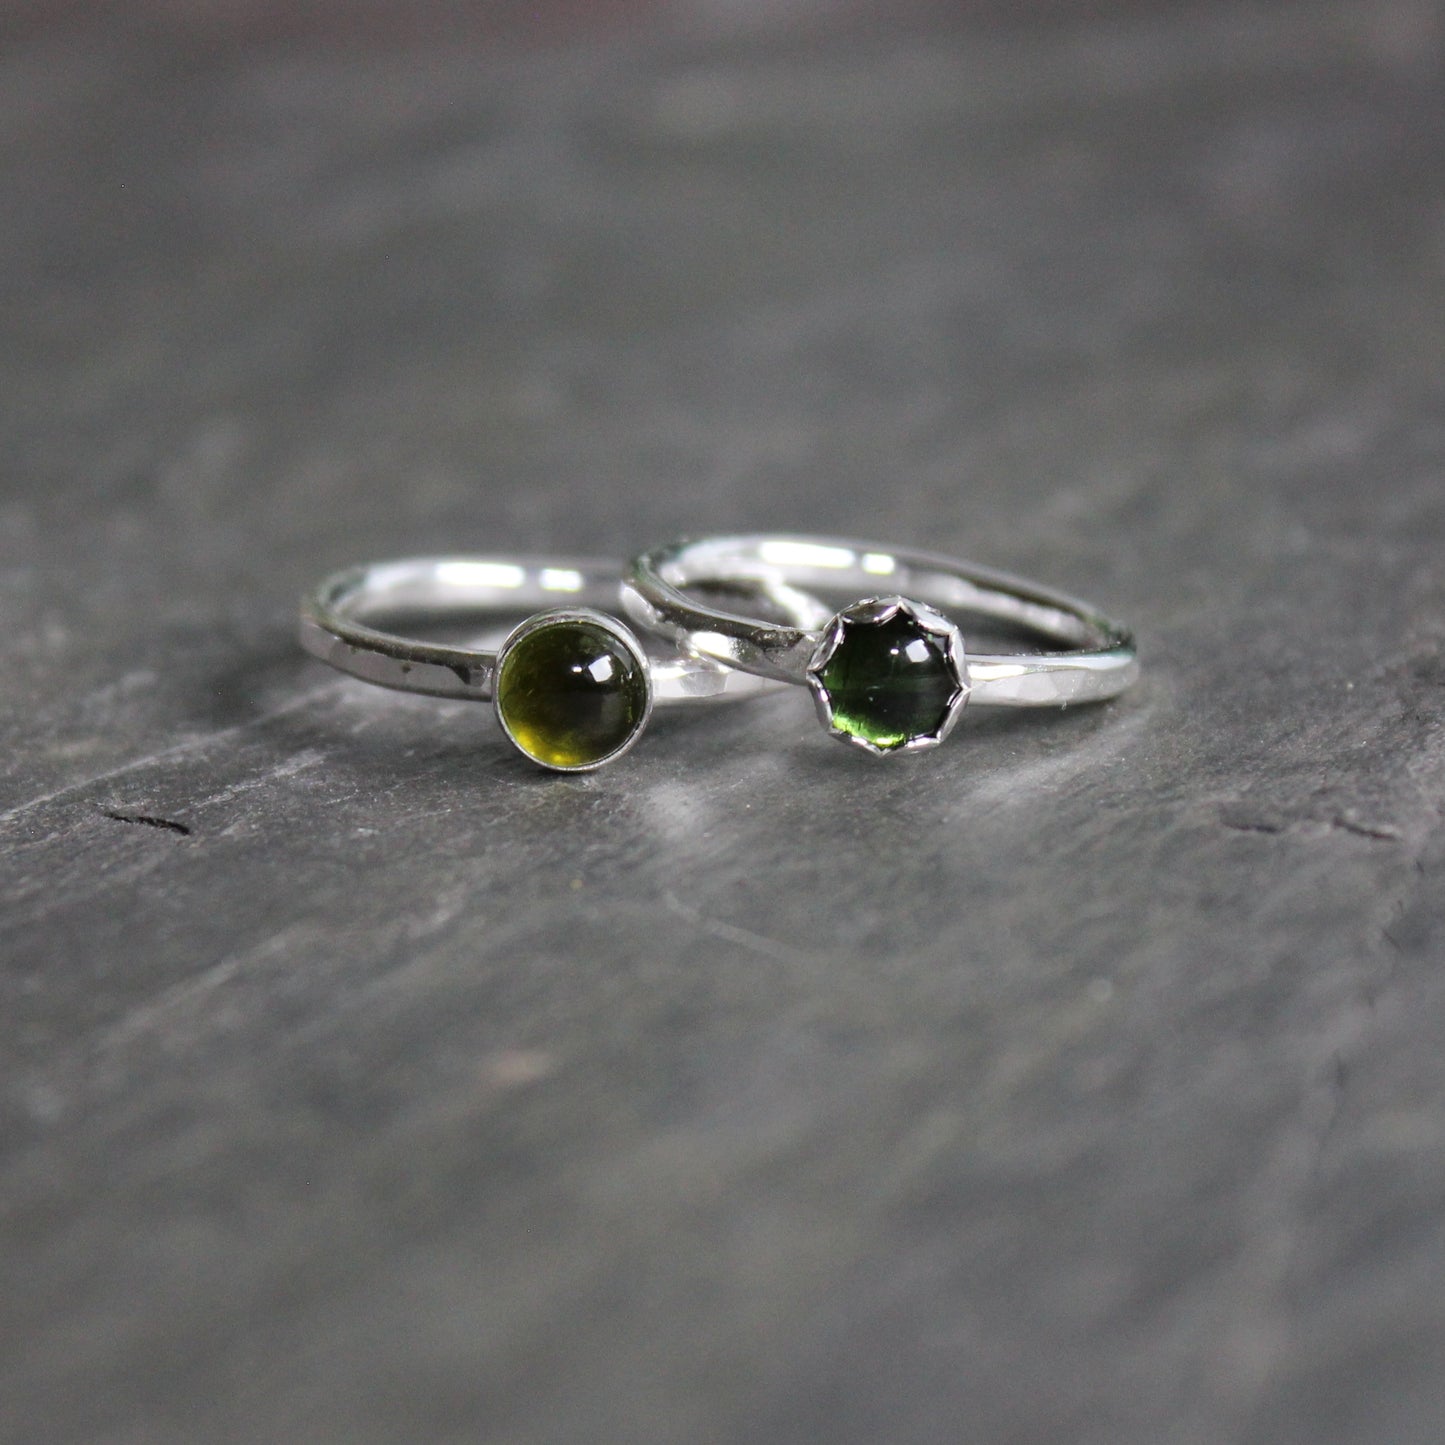 Two Round 6mm green tourmaline gemstone set in a sterling silver bezel setting on a sturdy hammered band. 